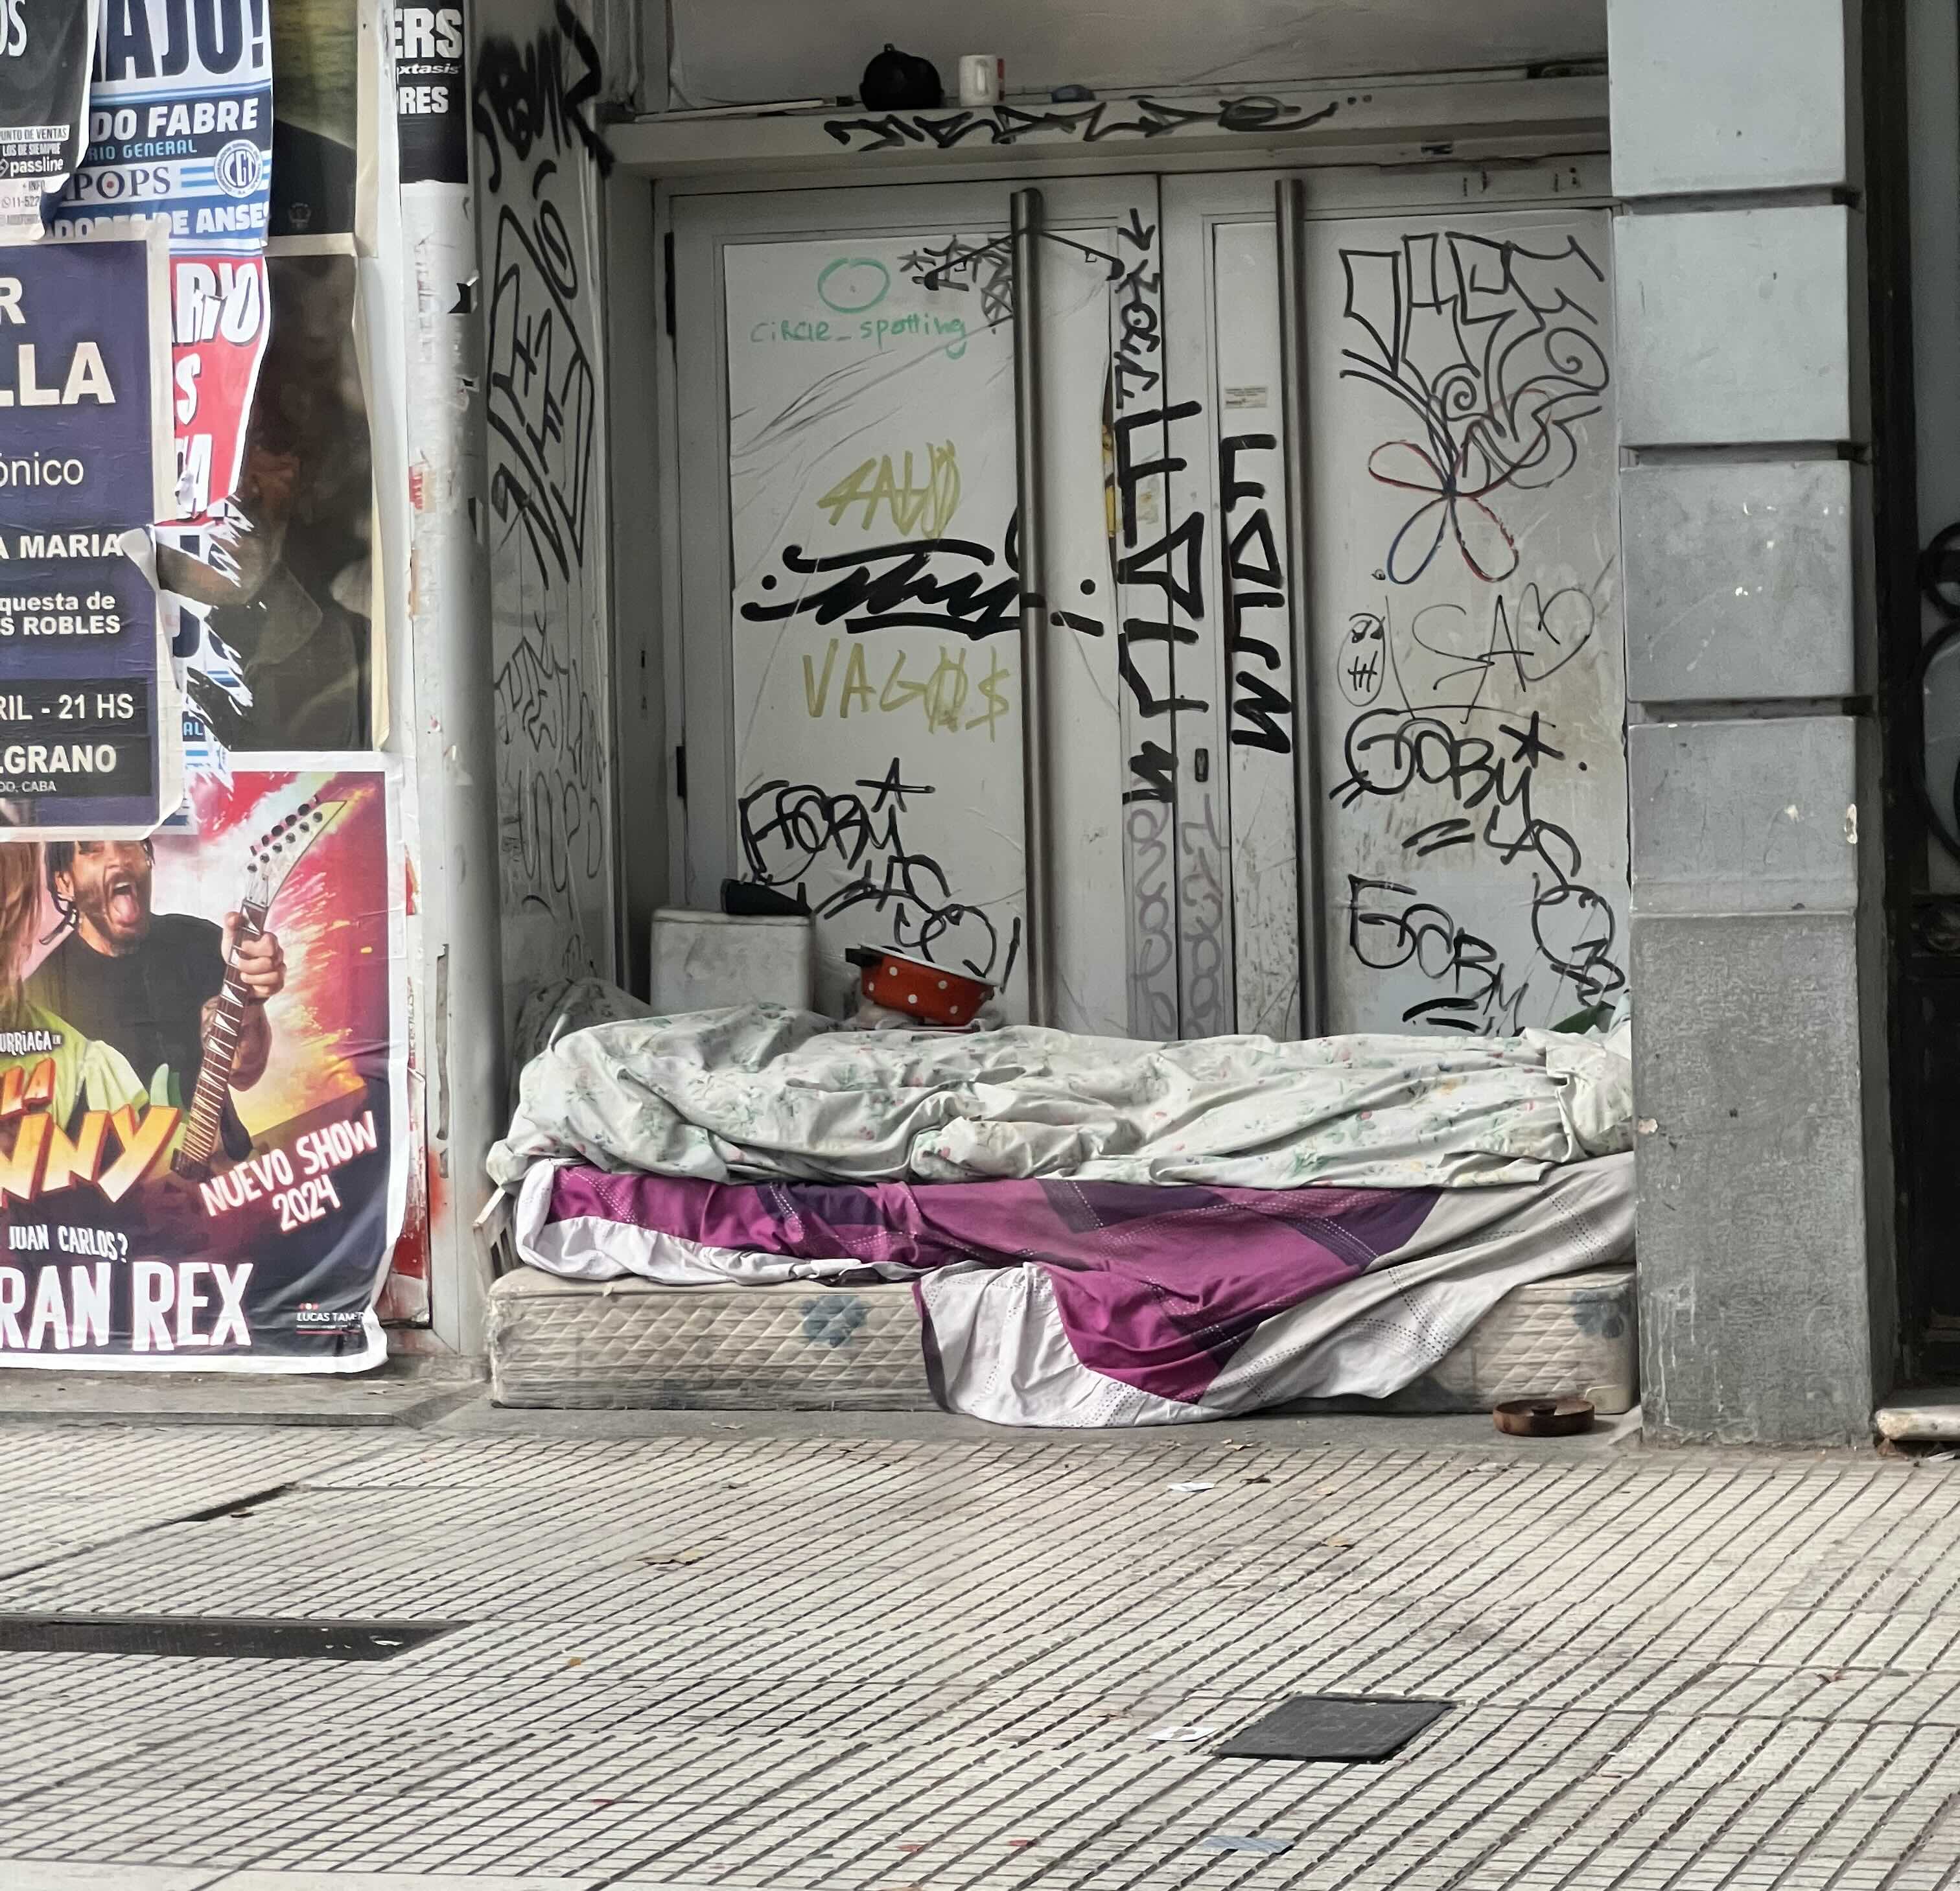 Makeshift bed on a graffiti-covered city sidewalk.